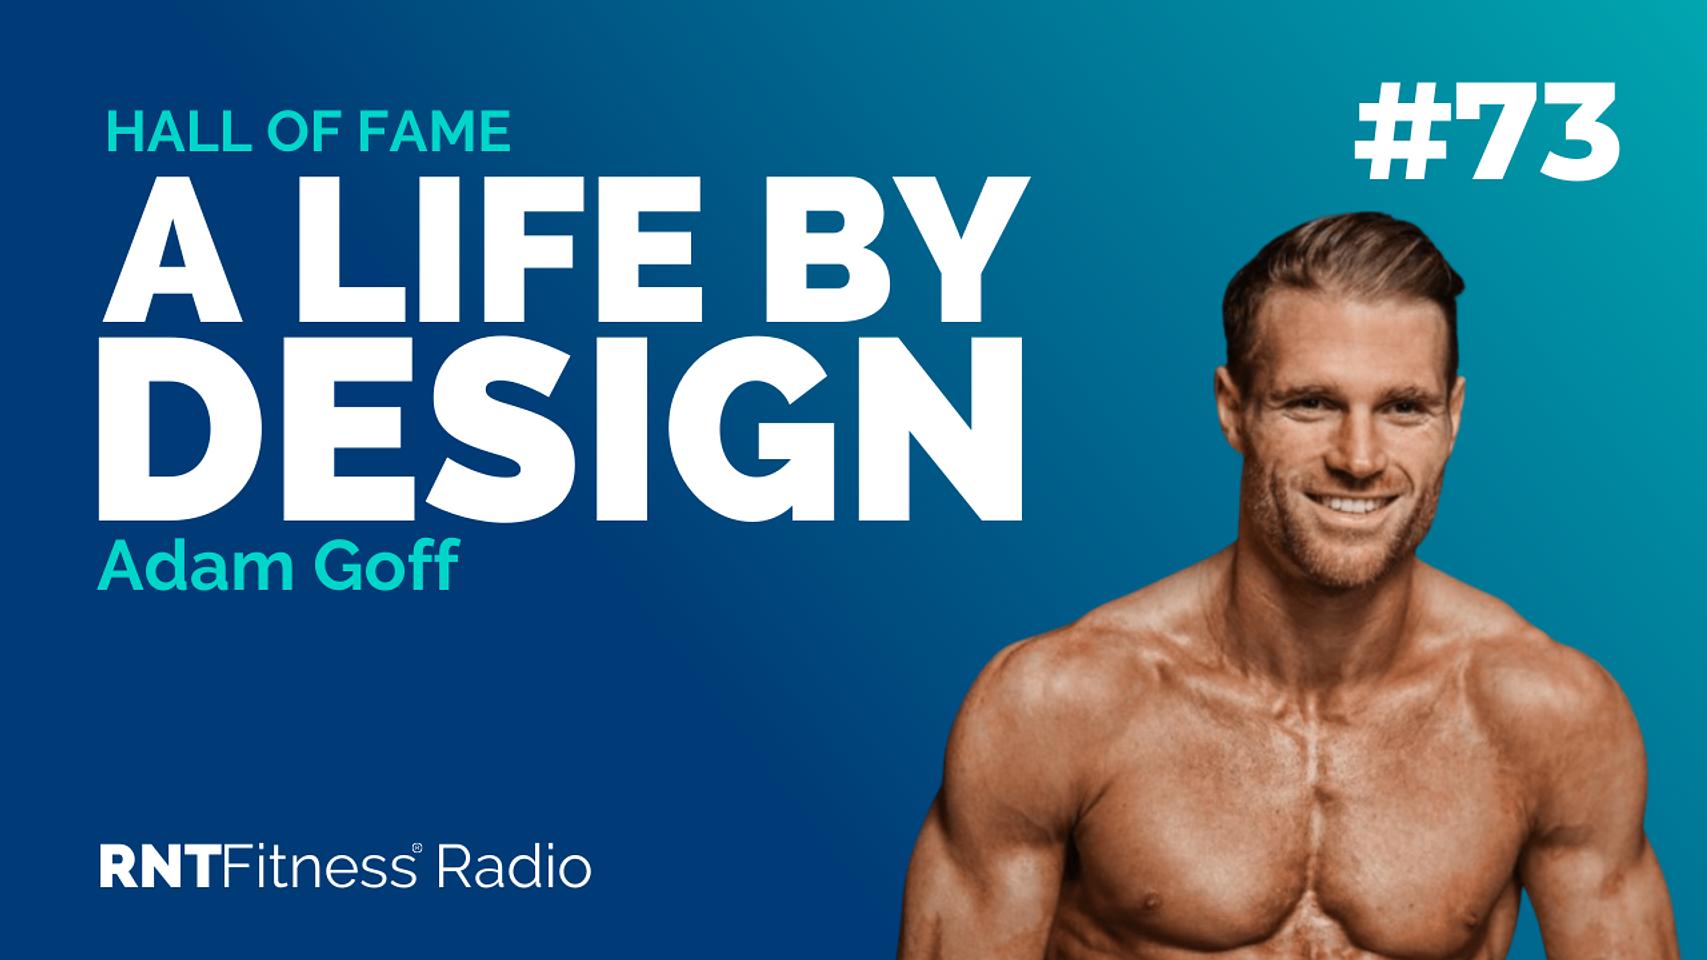 Ep. 73 - Hall of Fame | How To Live A Life By Design & Be On Your Triple A Game w/ Adam Goff